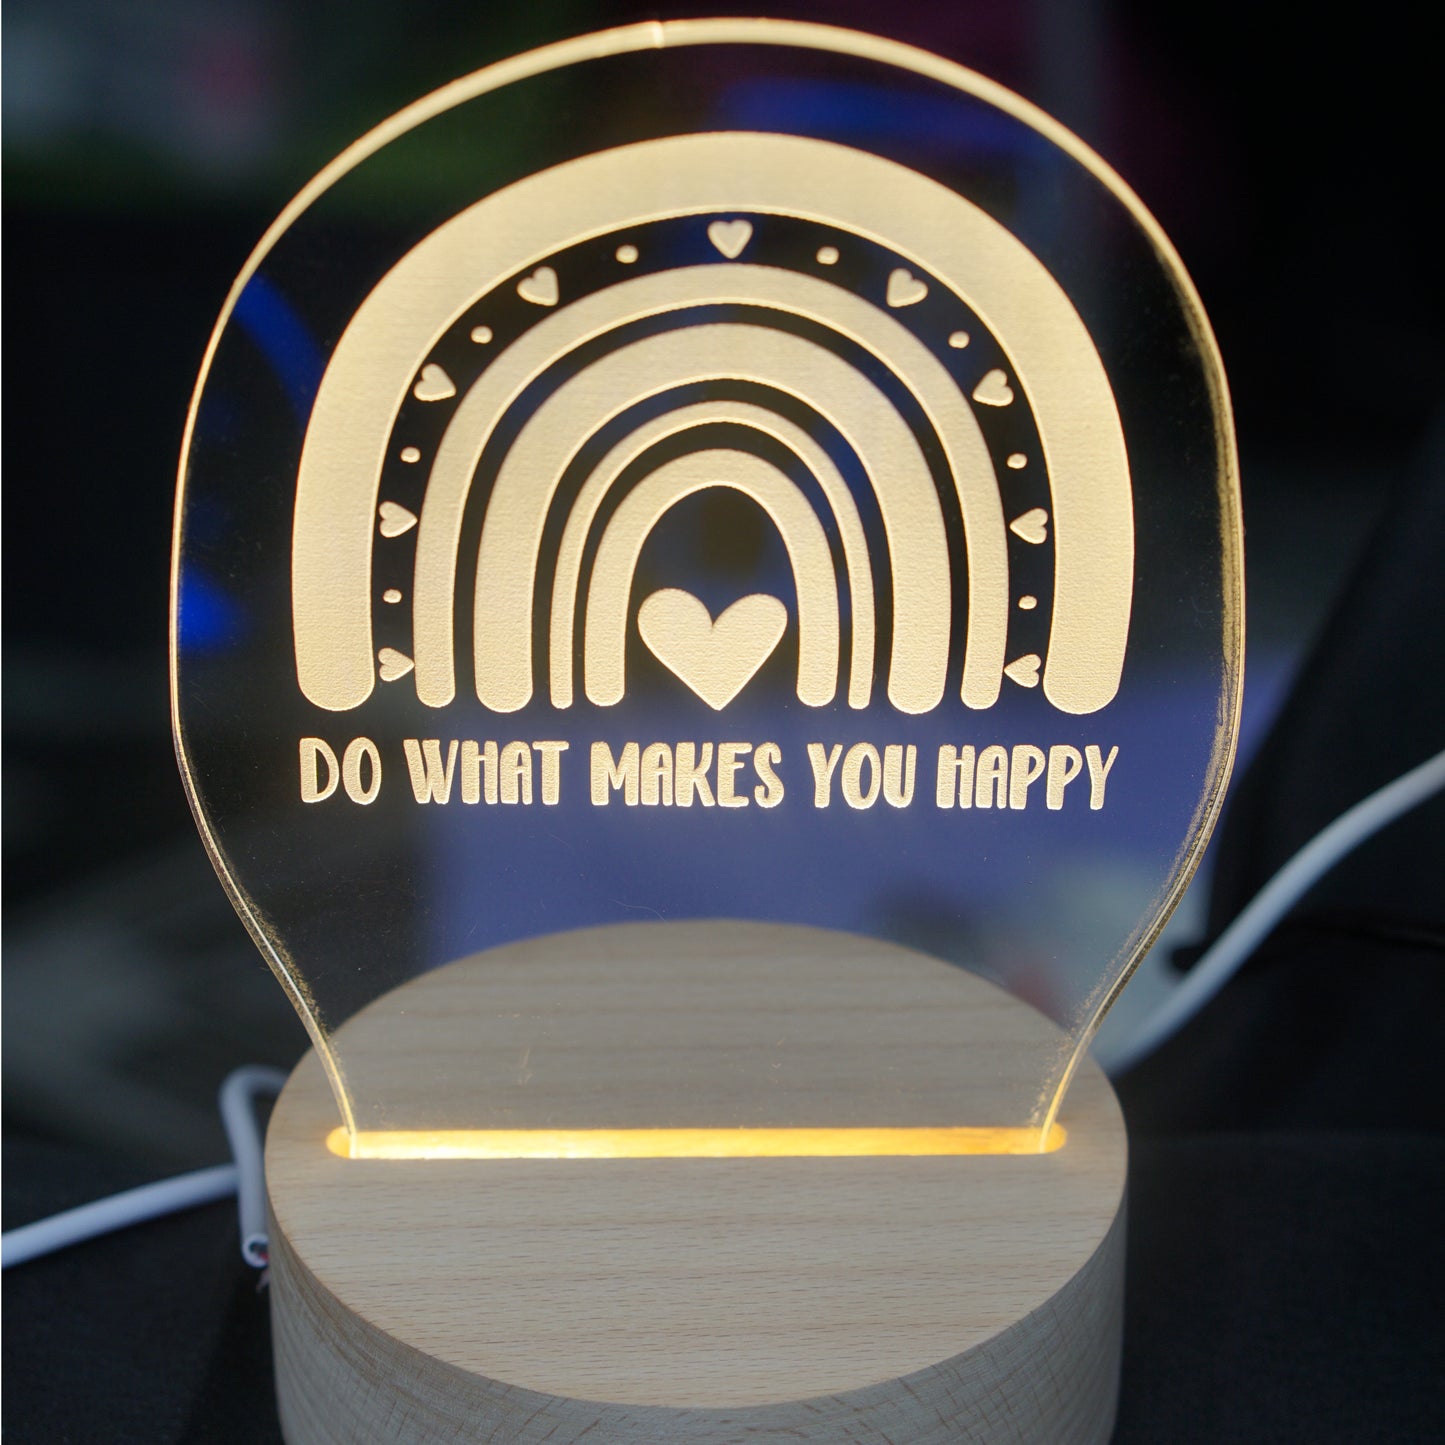 Holo Lamp: Do What Makes You Happy